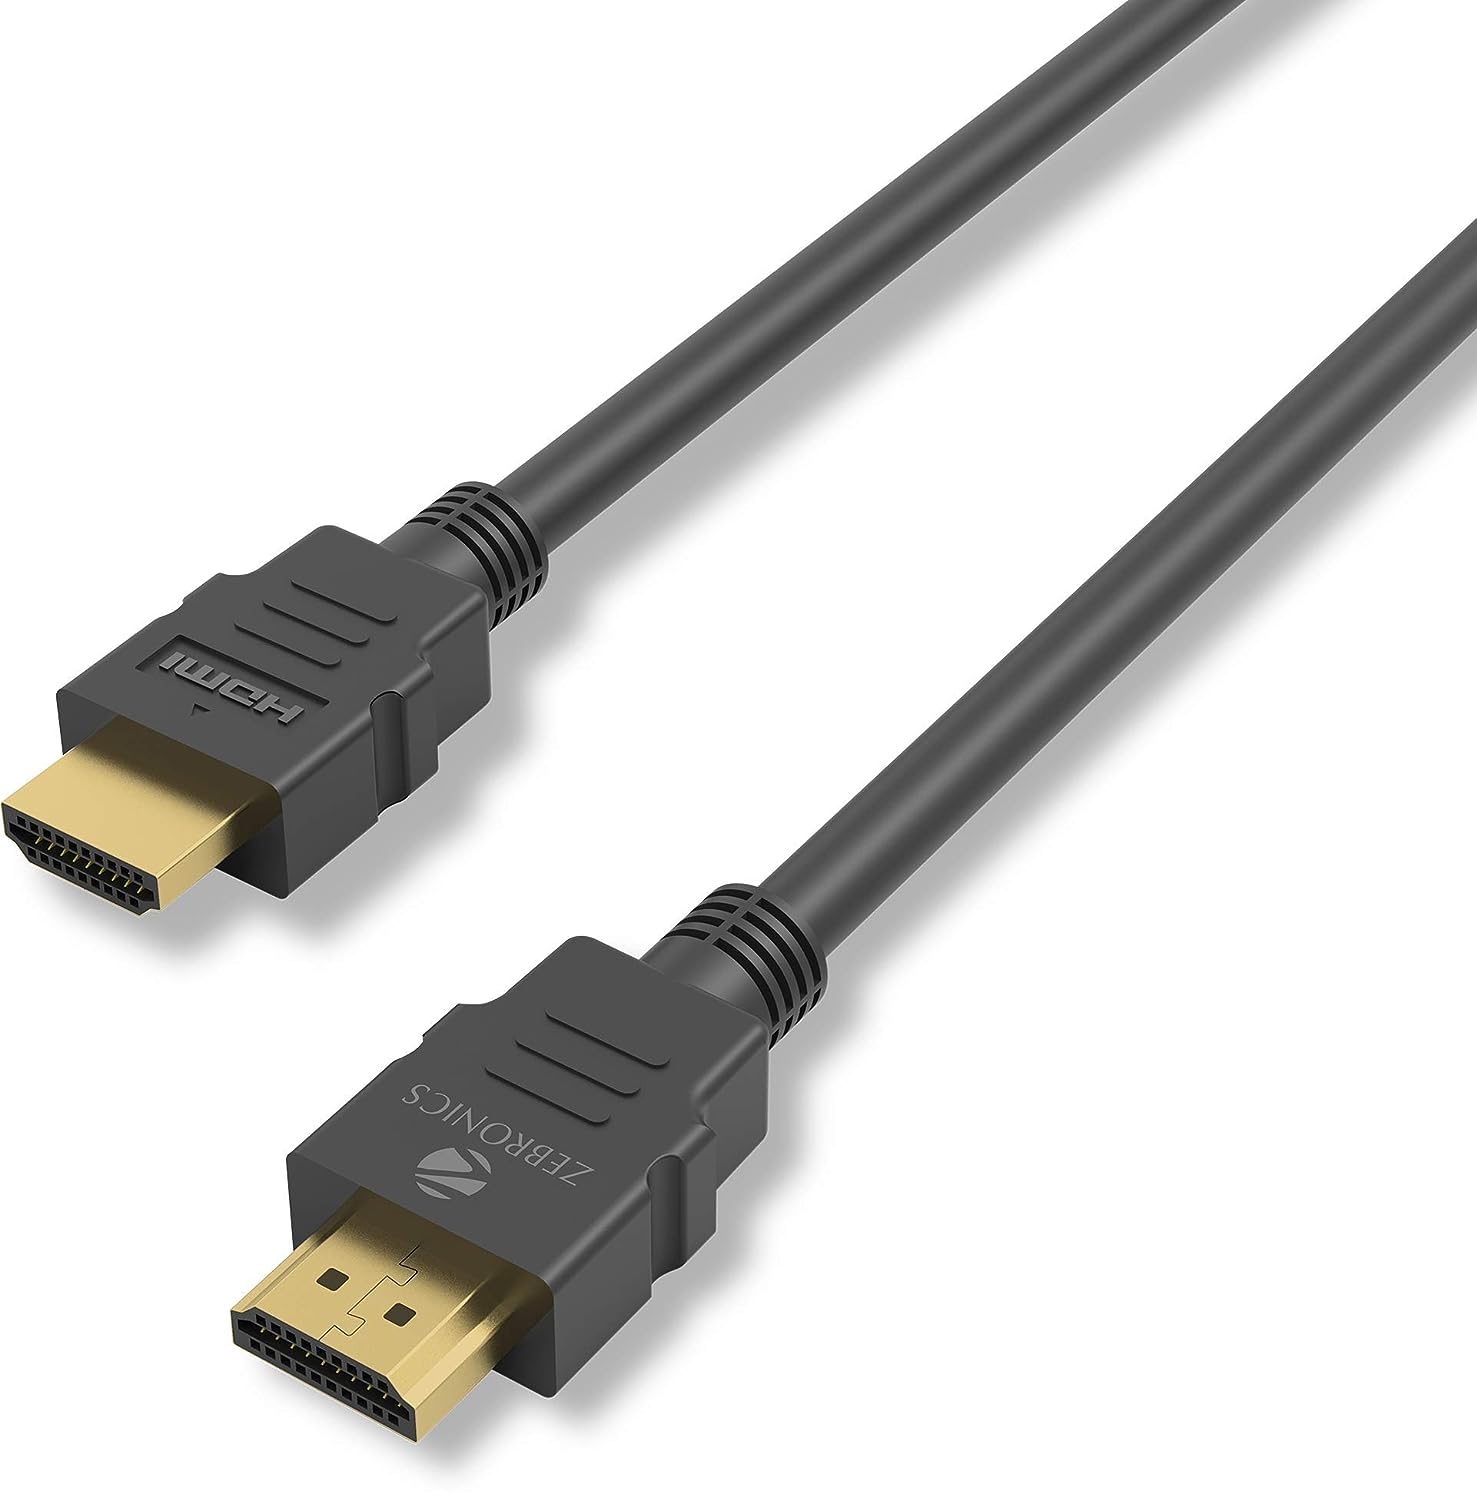 Zebronics Zeb-HAA5020 (5 Meter/ 16 feet) HDMI Cable Supports 3D, ARC & CEC Extension, Compatible with HDMI-Enabled TV, Blu-ray, Playstation (Gold Plated Connectors) HDMI Cable